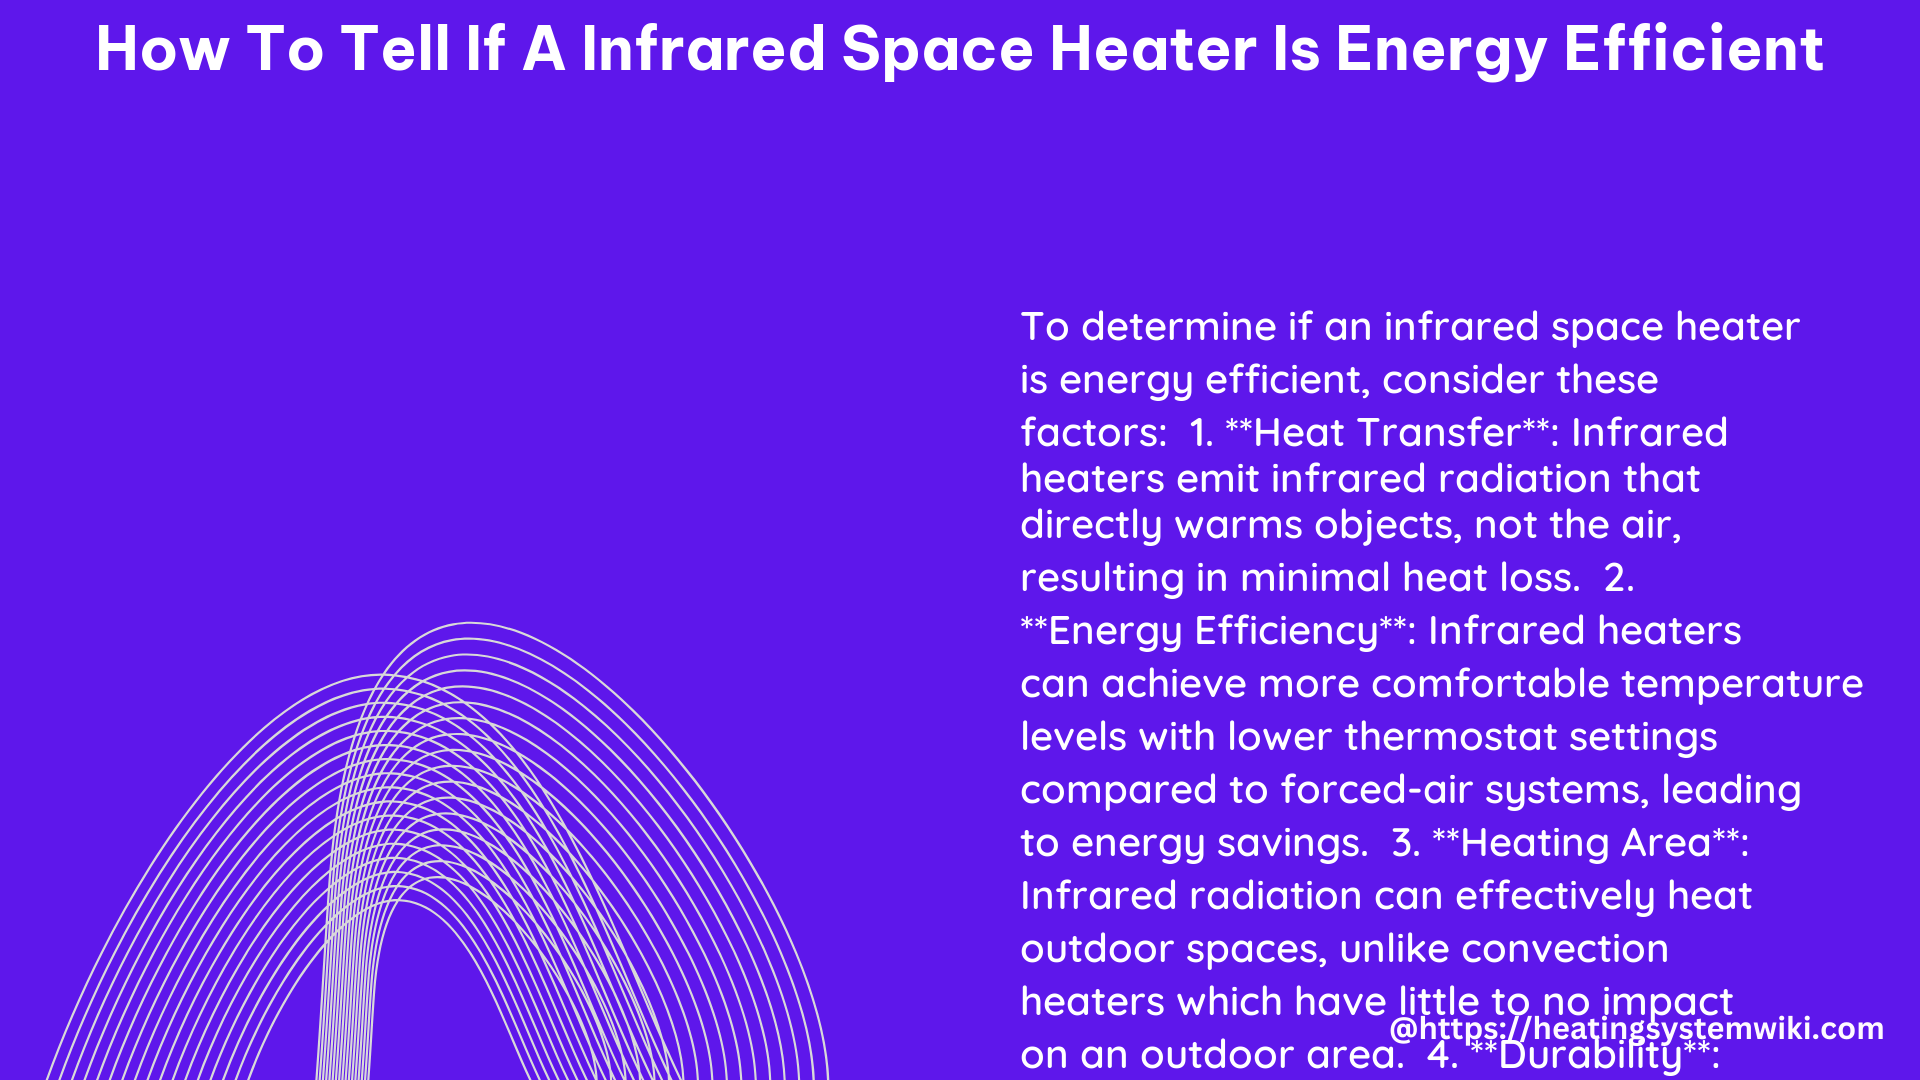 how to tell if a Infrared Space Heater is energy efficient